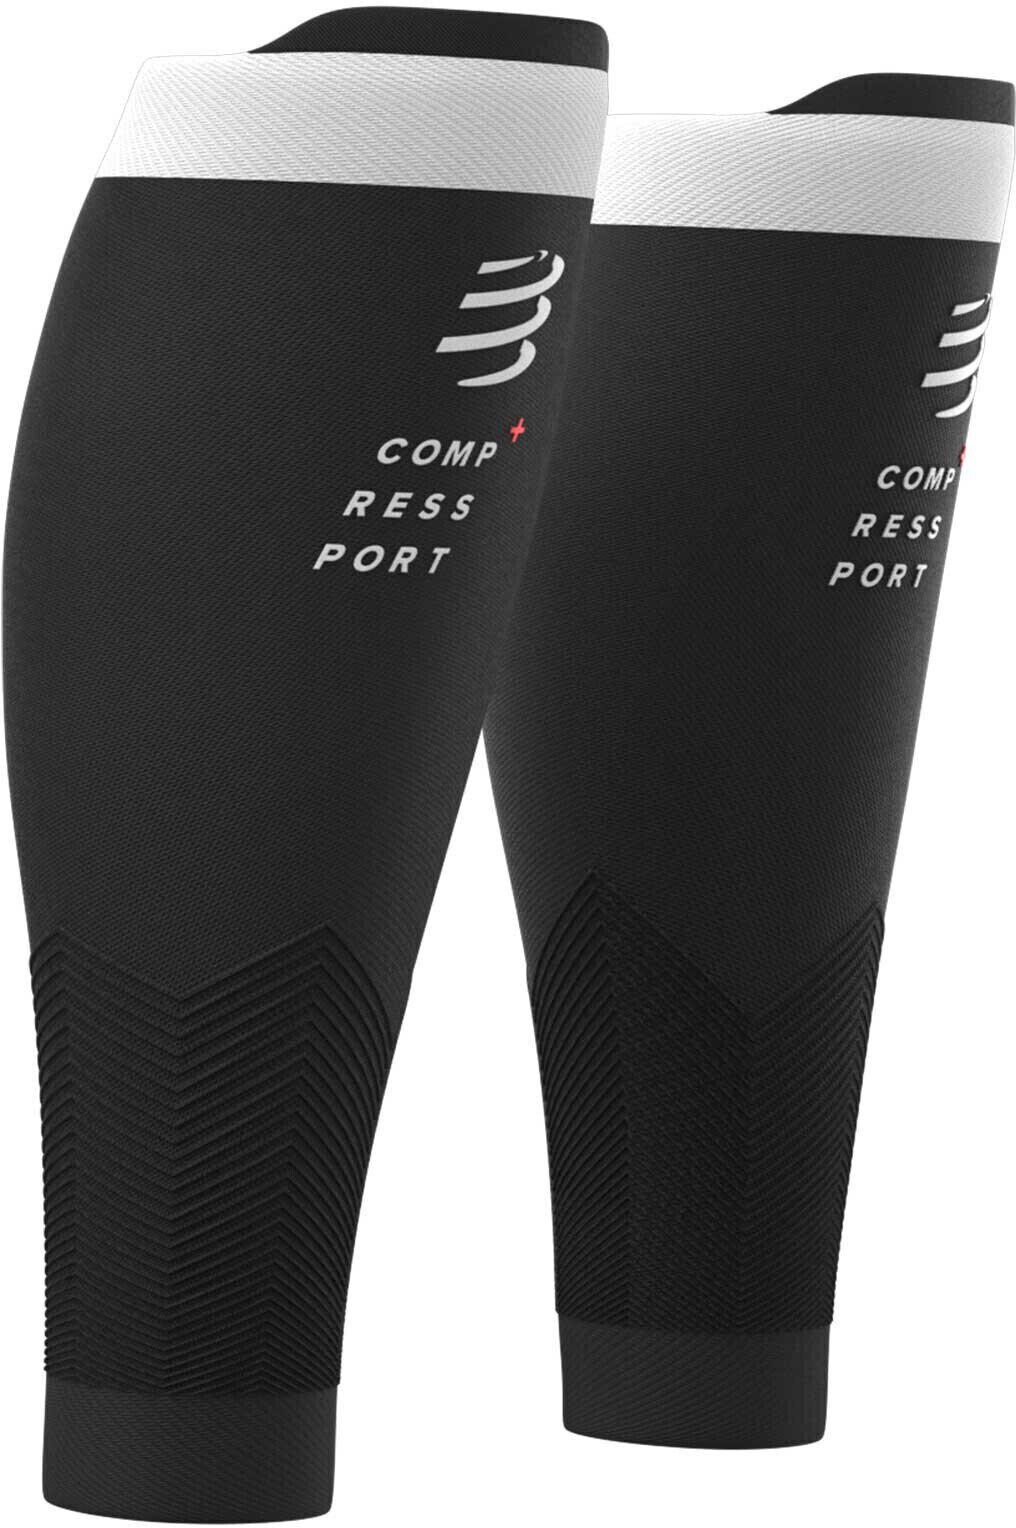 Calf covers for runners Compressport R2v2 Black T4 Calf covers for runners